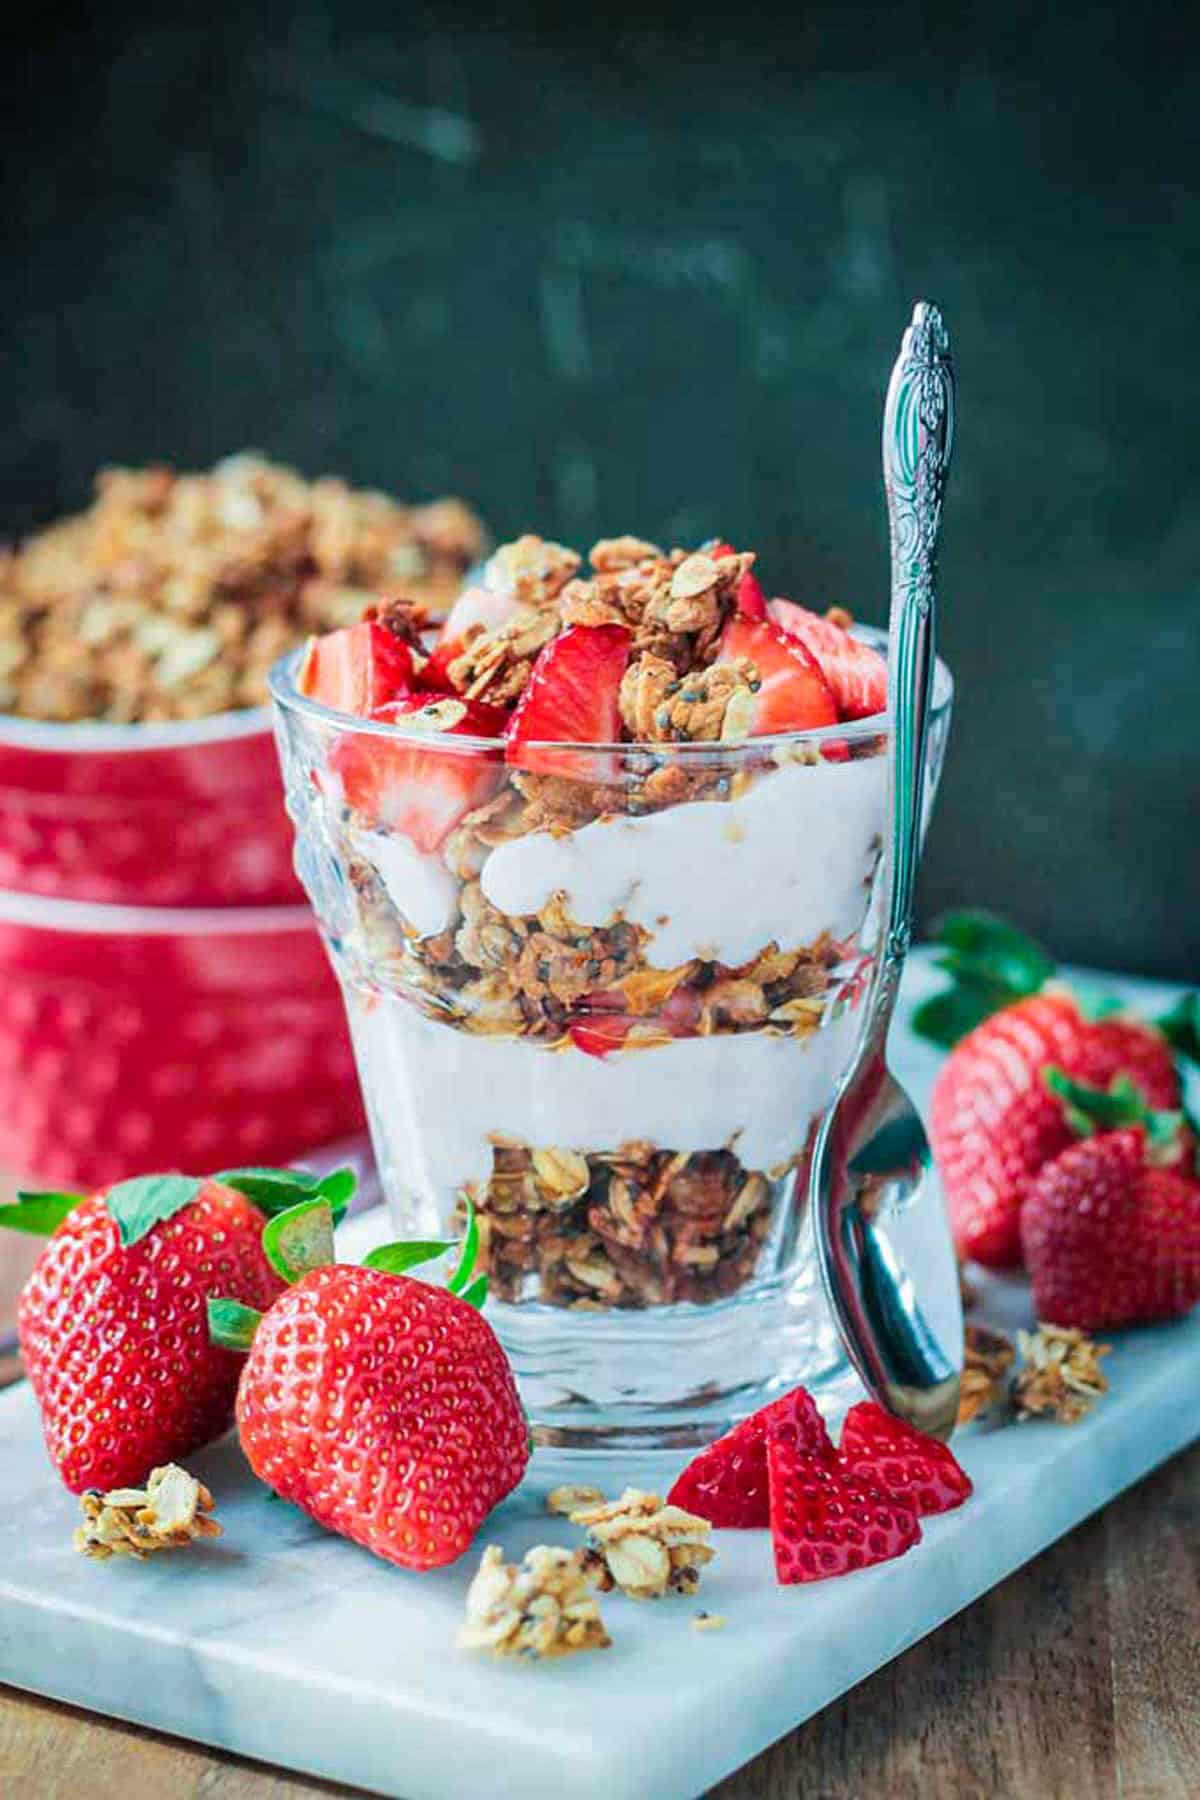 Coconut Chia Granola layered with dairy free yogurt and fresh strawberries in a parfait glass